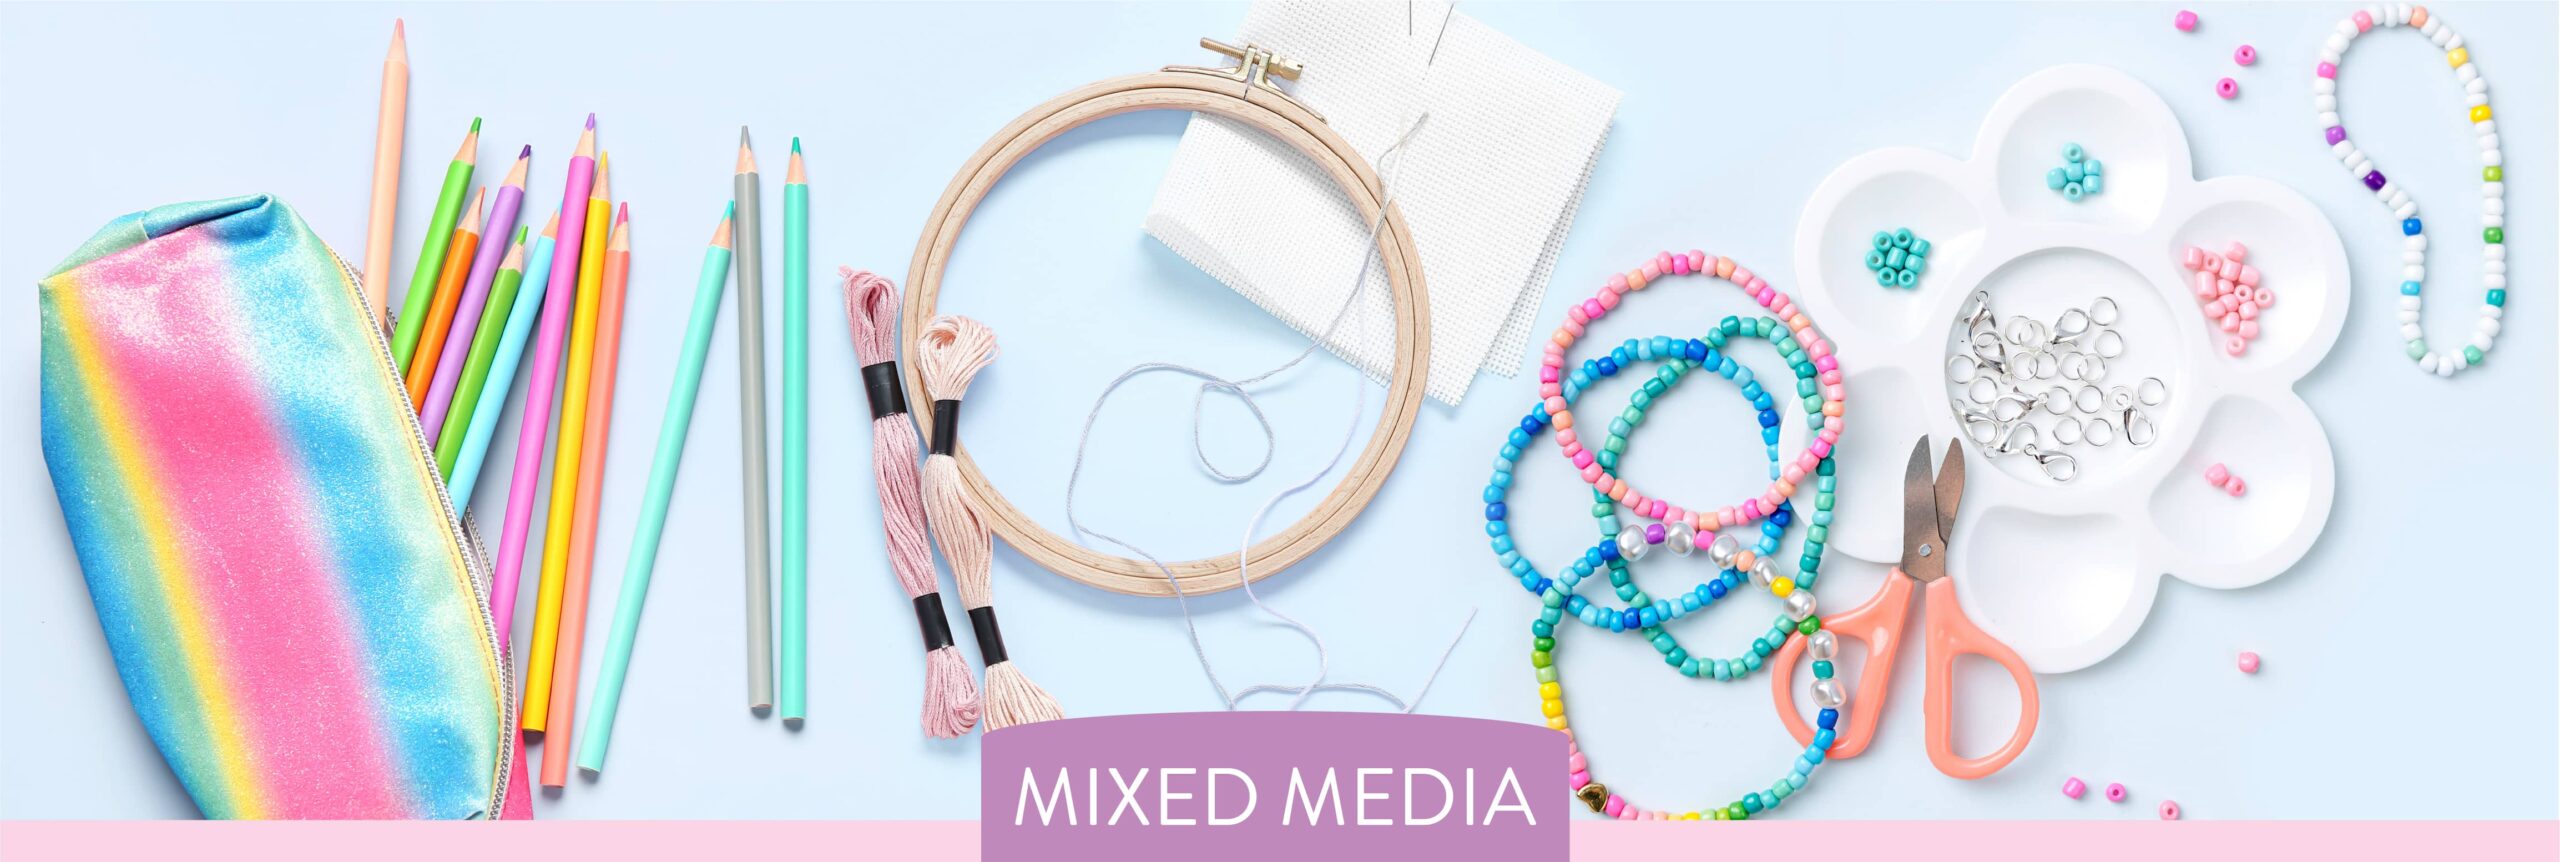 Mixed Media: Beads and More!